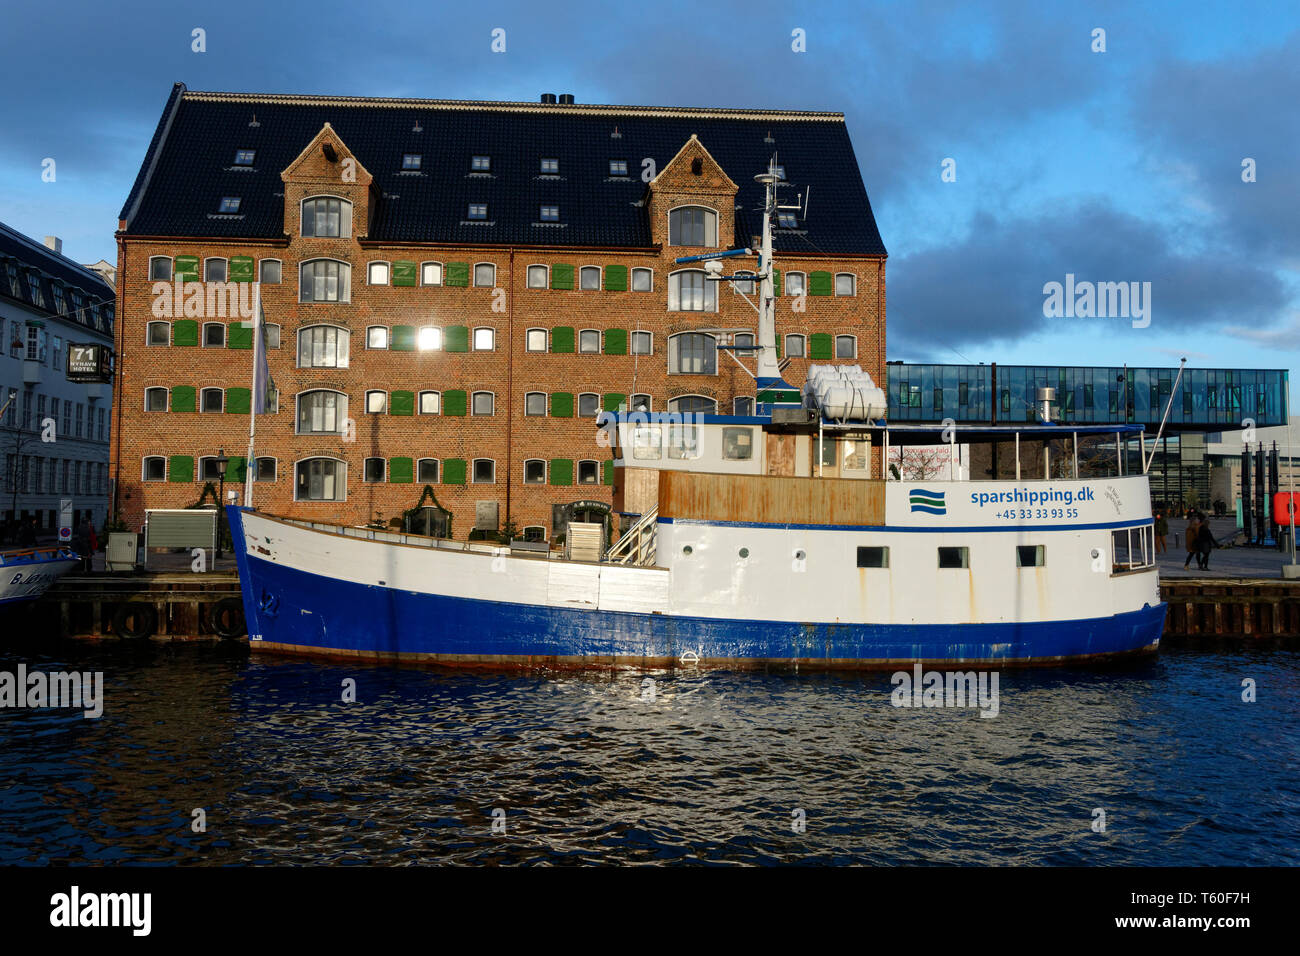 Old boat moored in front of a building on the Nyhavn canal, Copenhagen, Denmark, Europe Stock Photo